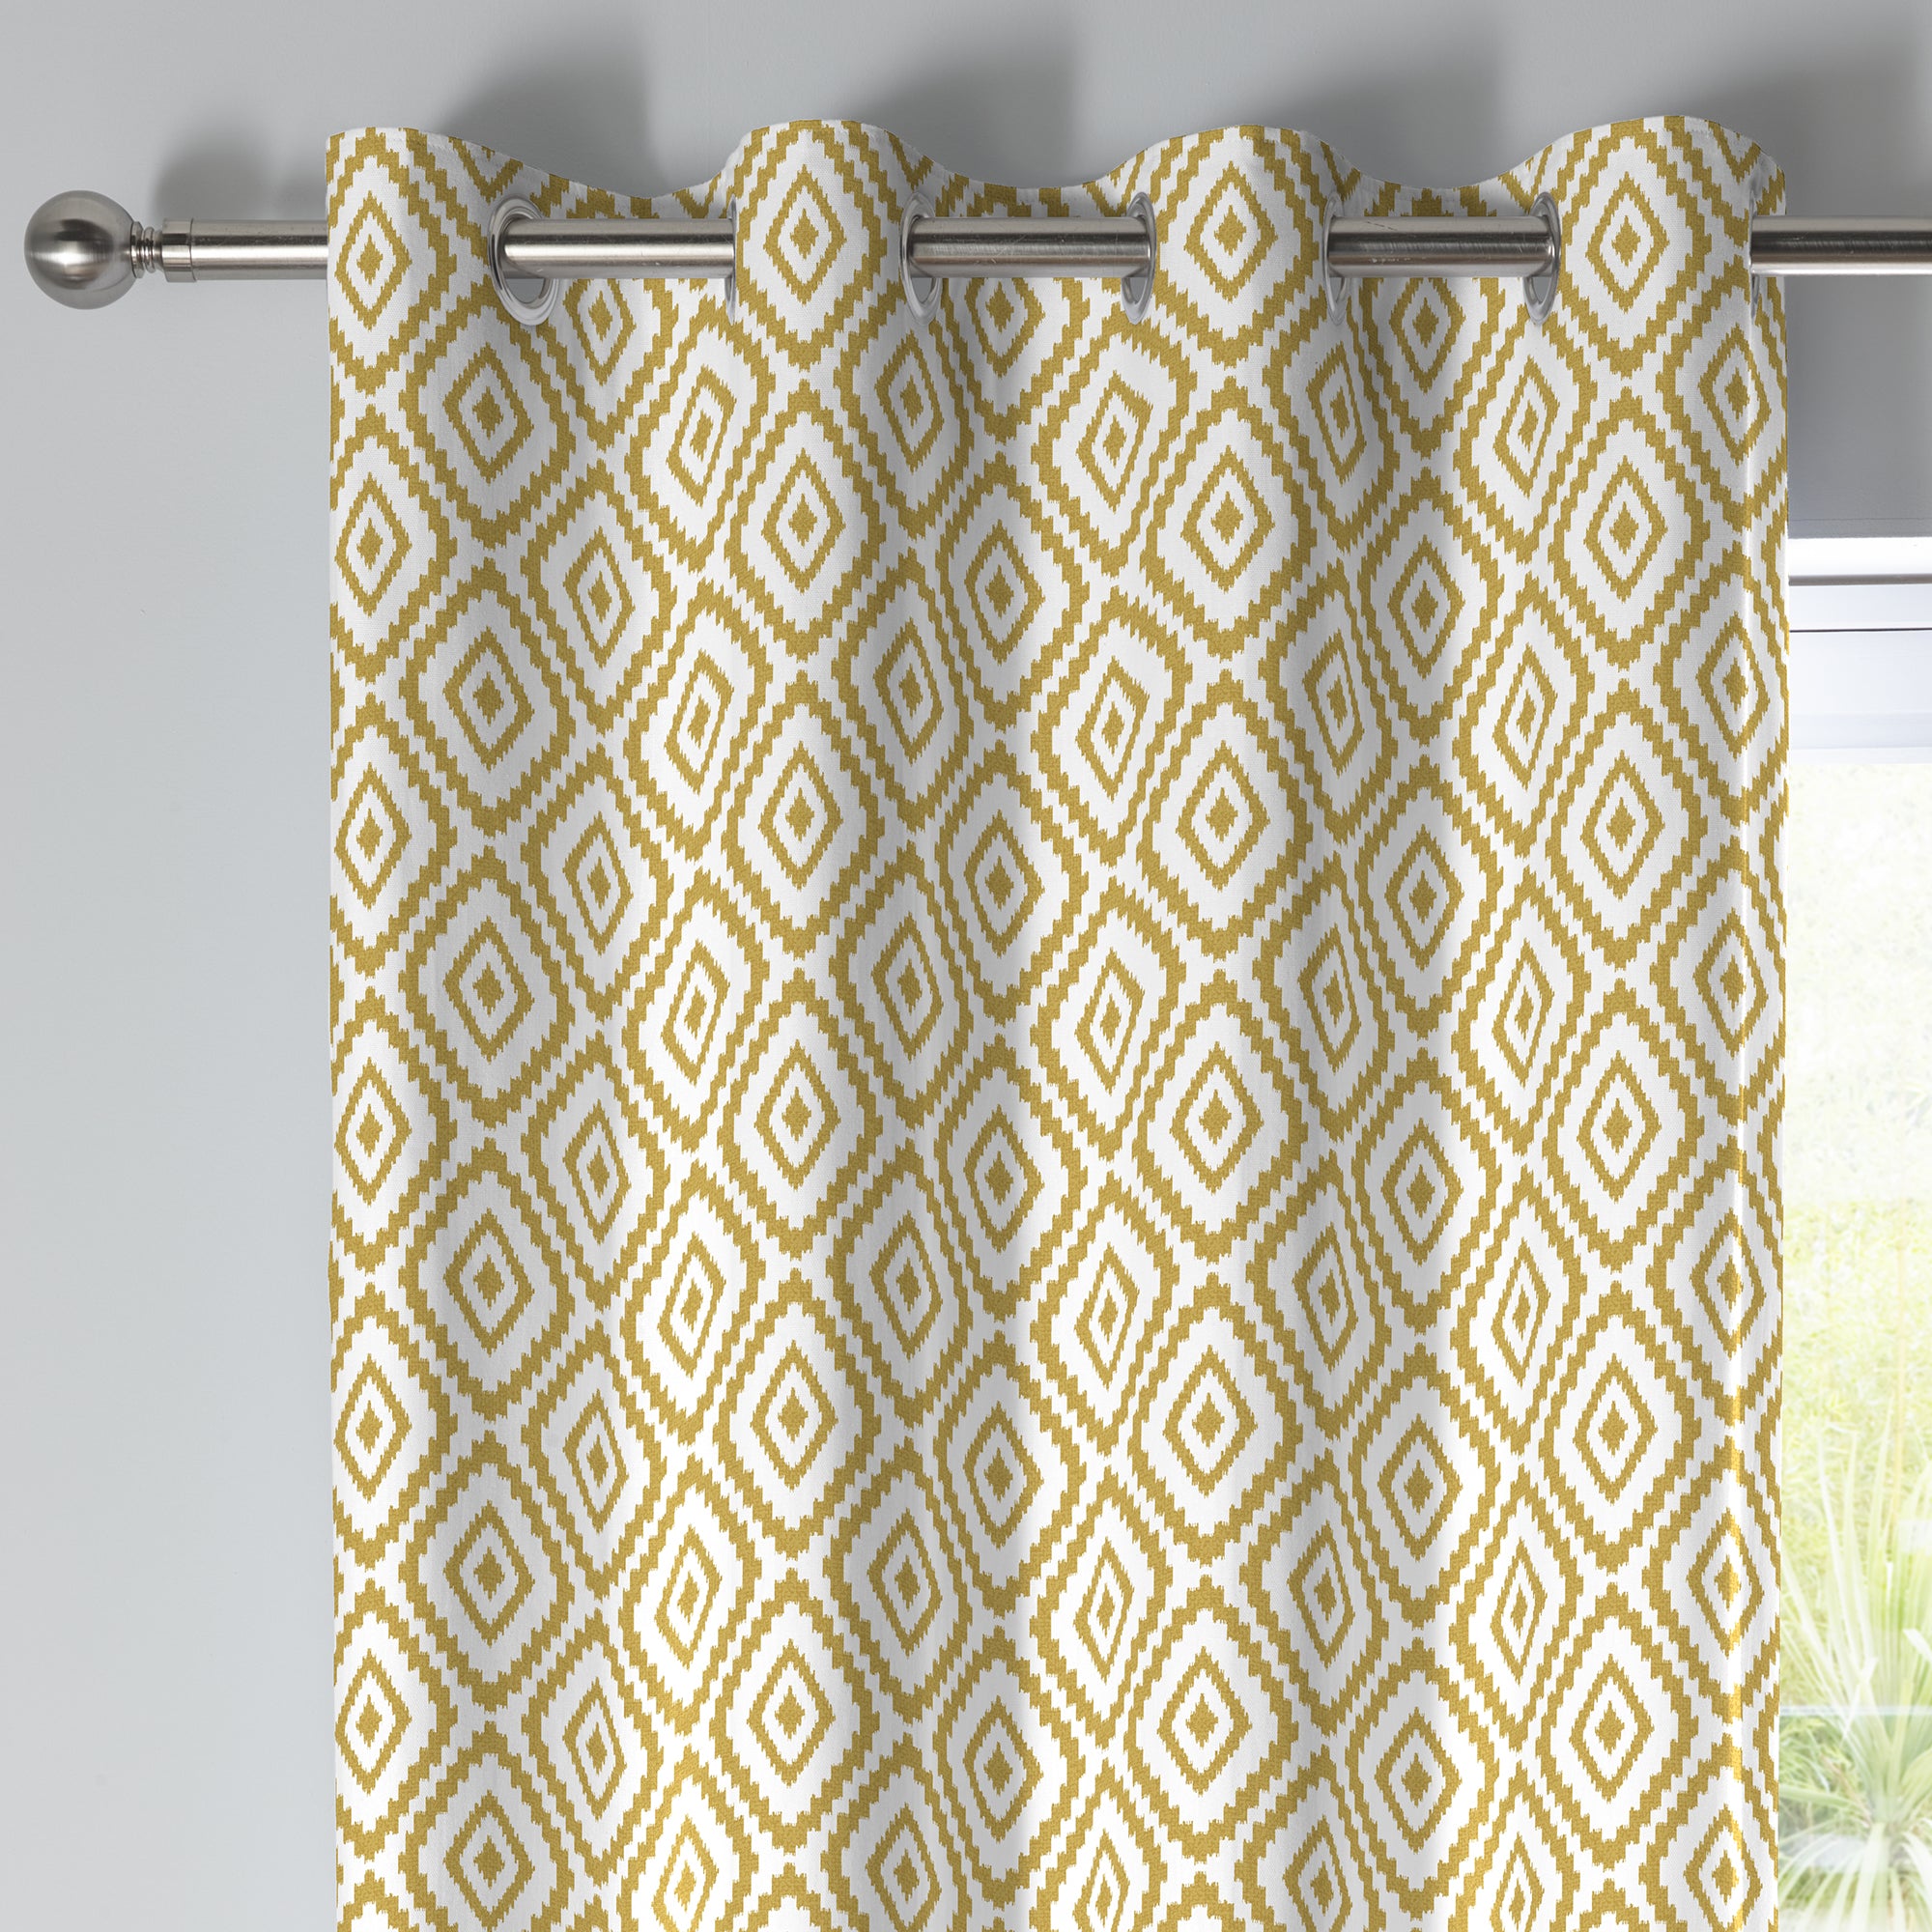 Navaho - 100% Cotton Pair of Eyelet Curtains in Ochre - by Fusion